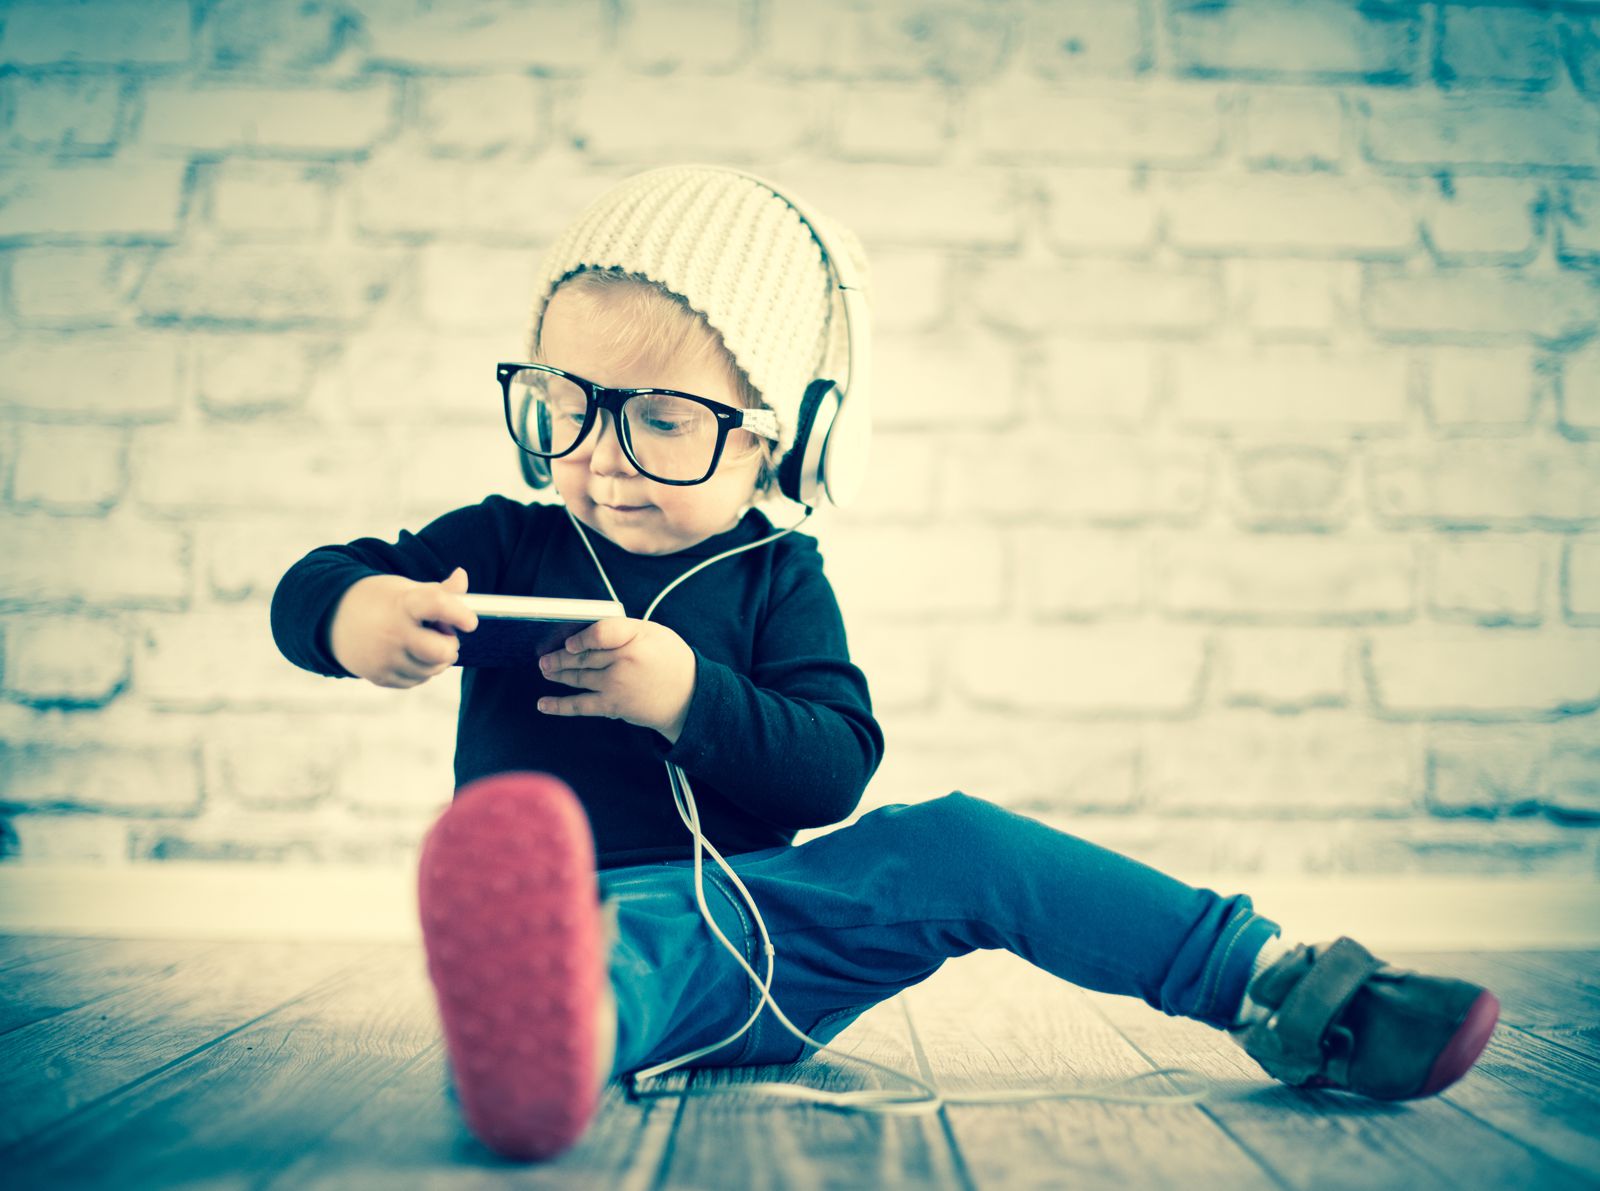 A child listening to music on an iPod